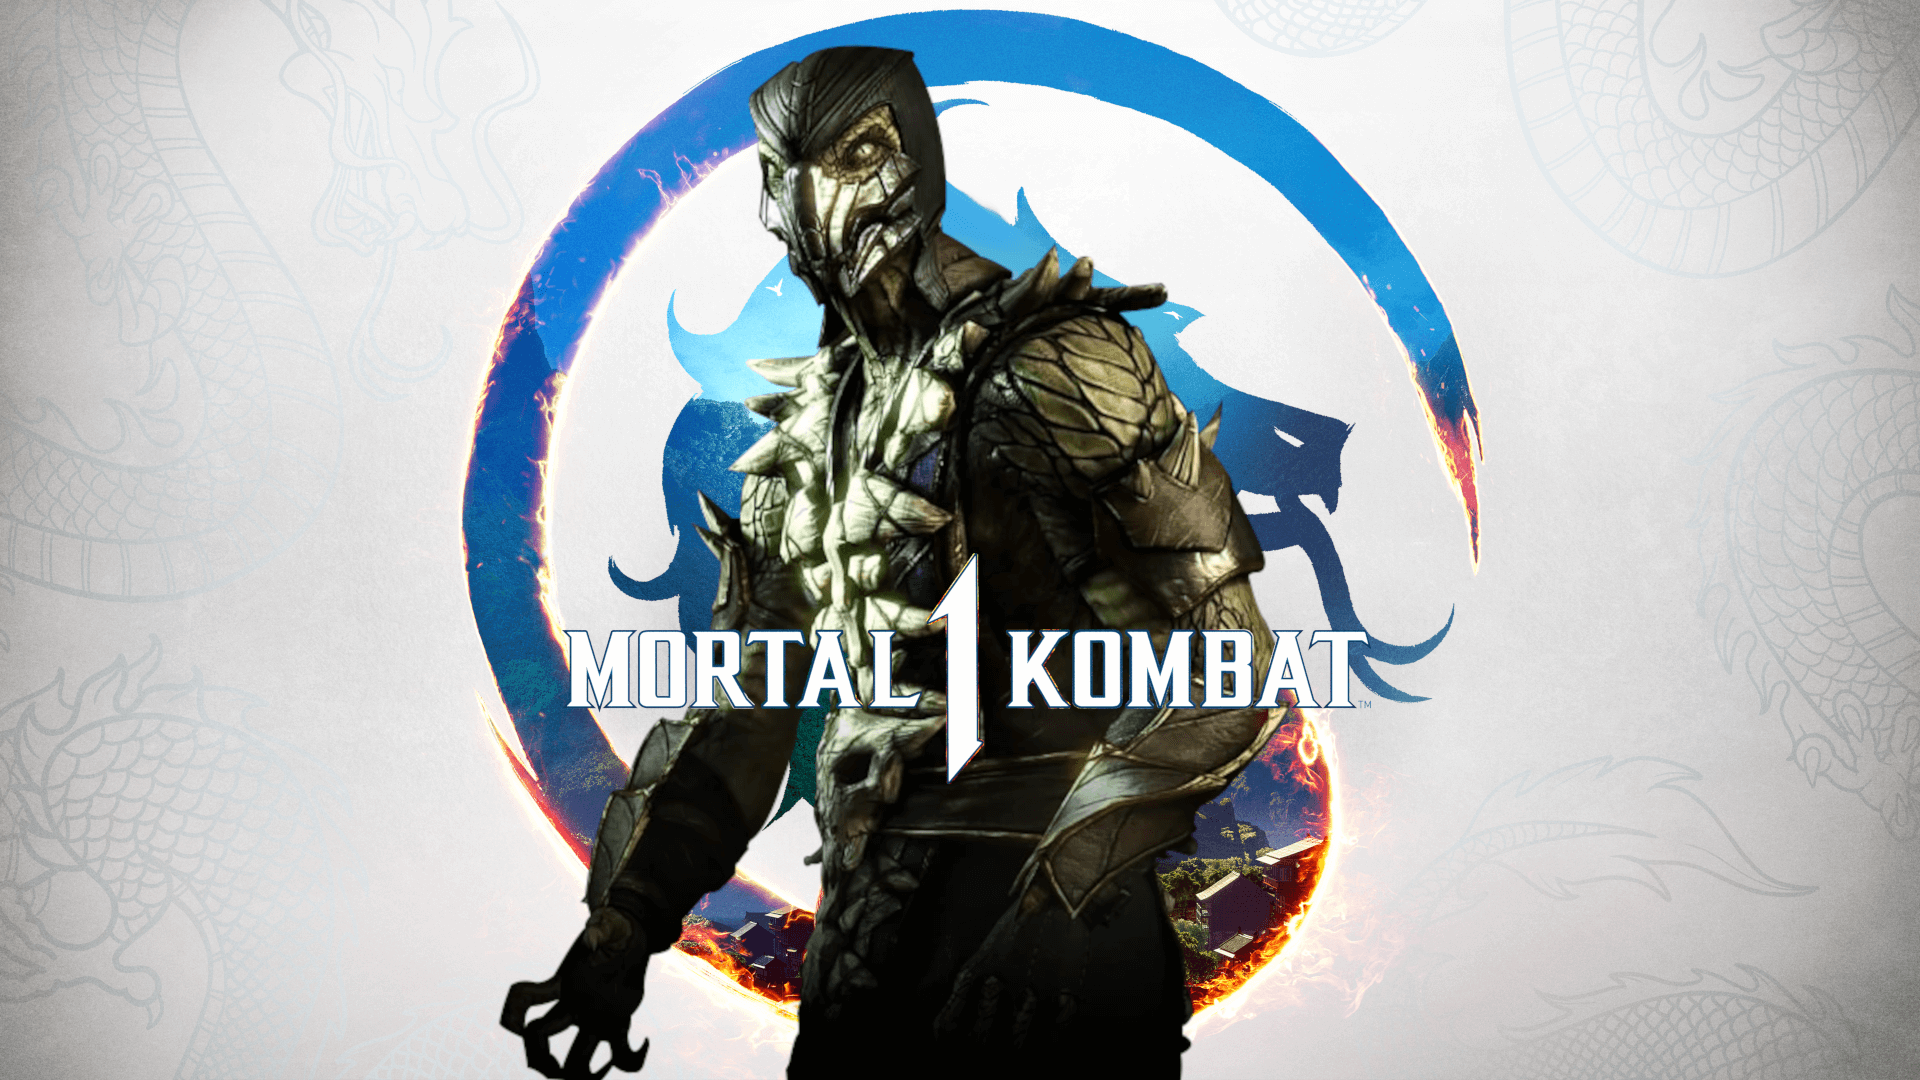 On this day 25 years ago, Mortal Kombat ll released in North America. Mortal  Kombat II